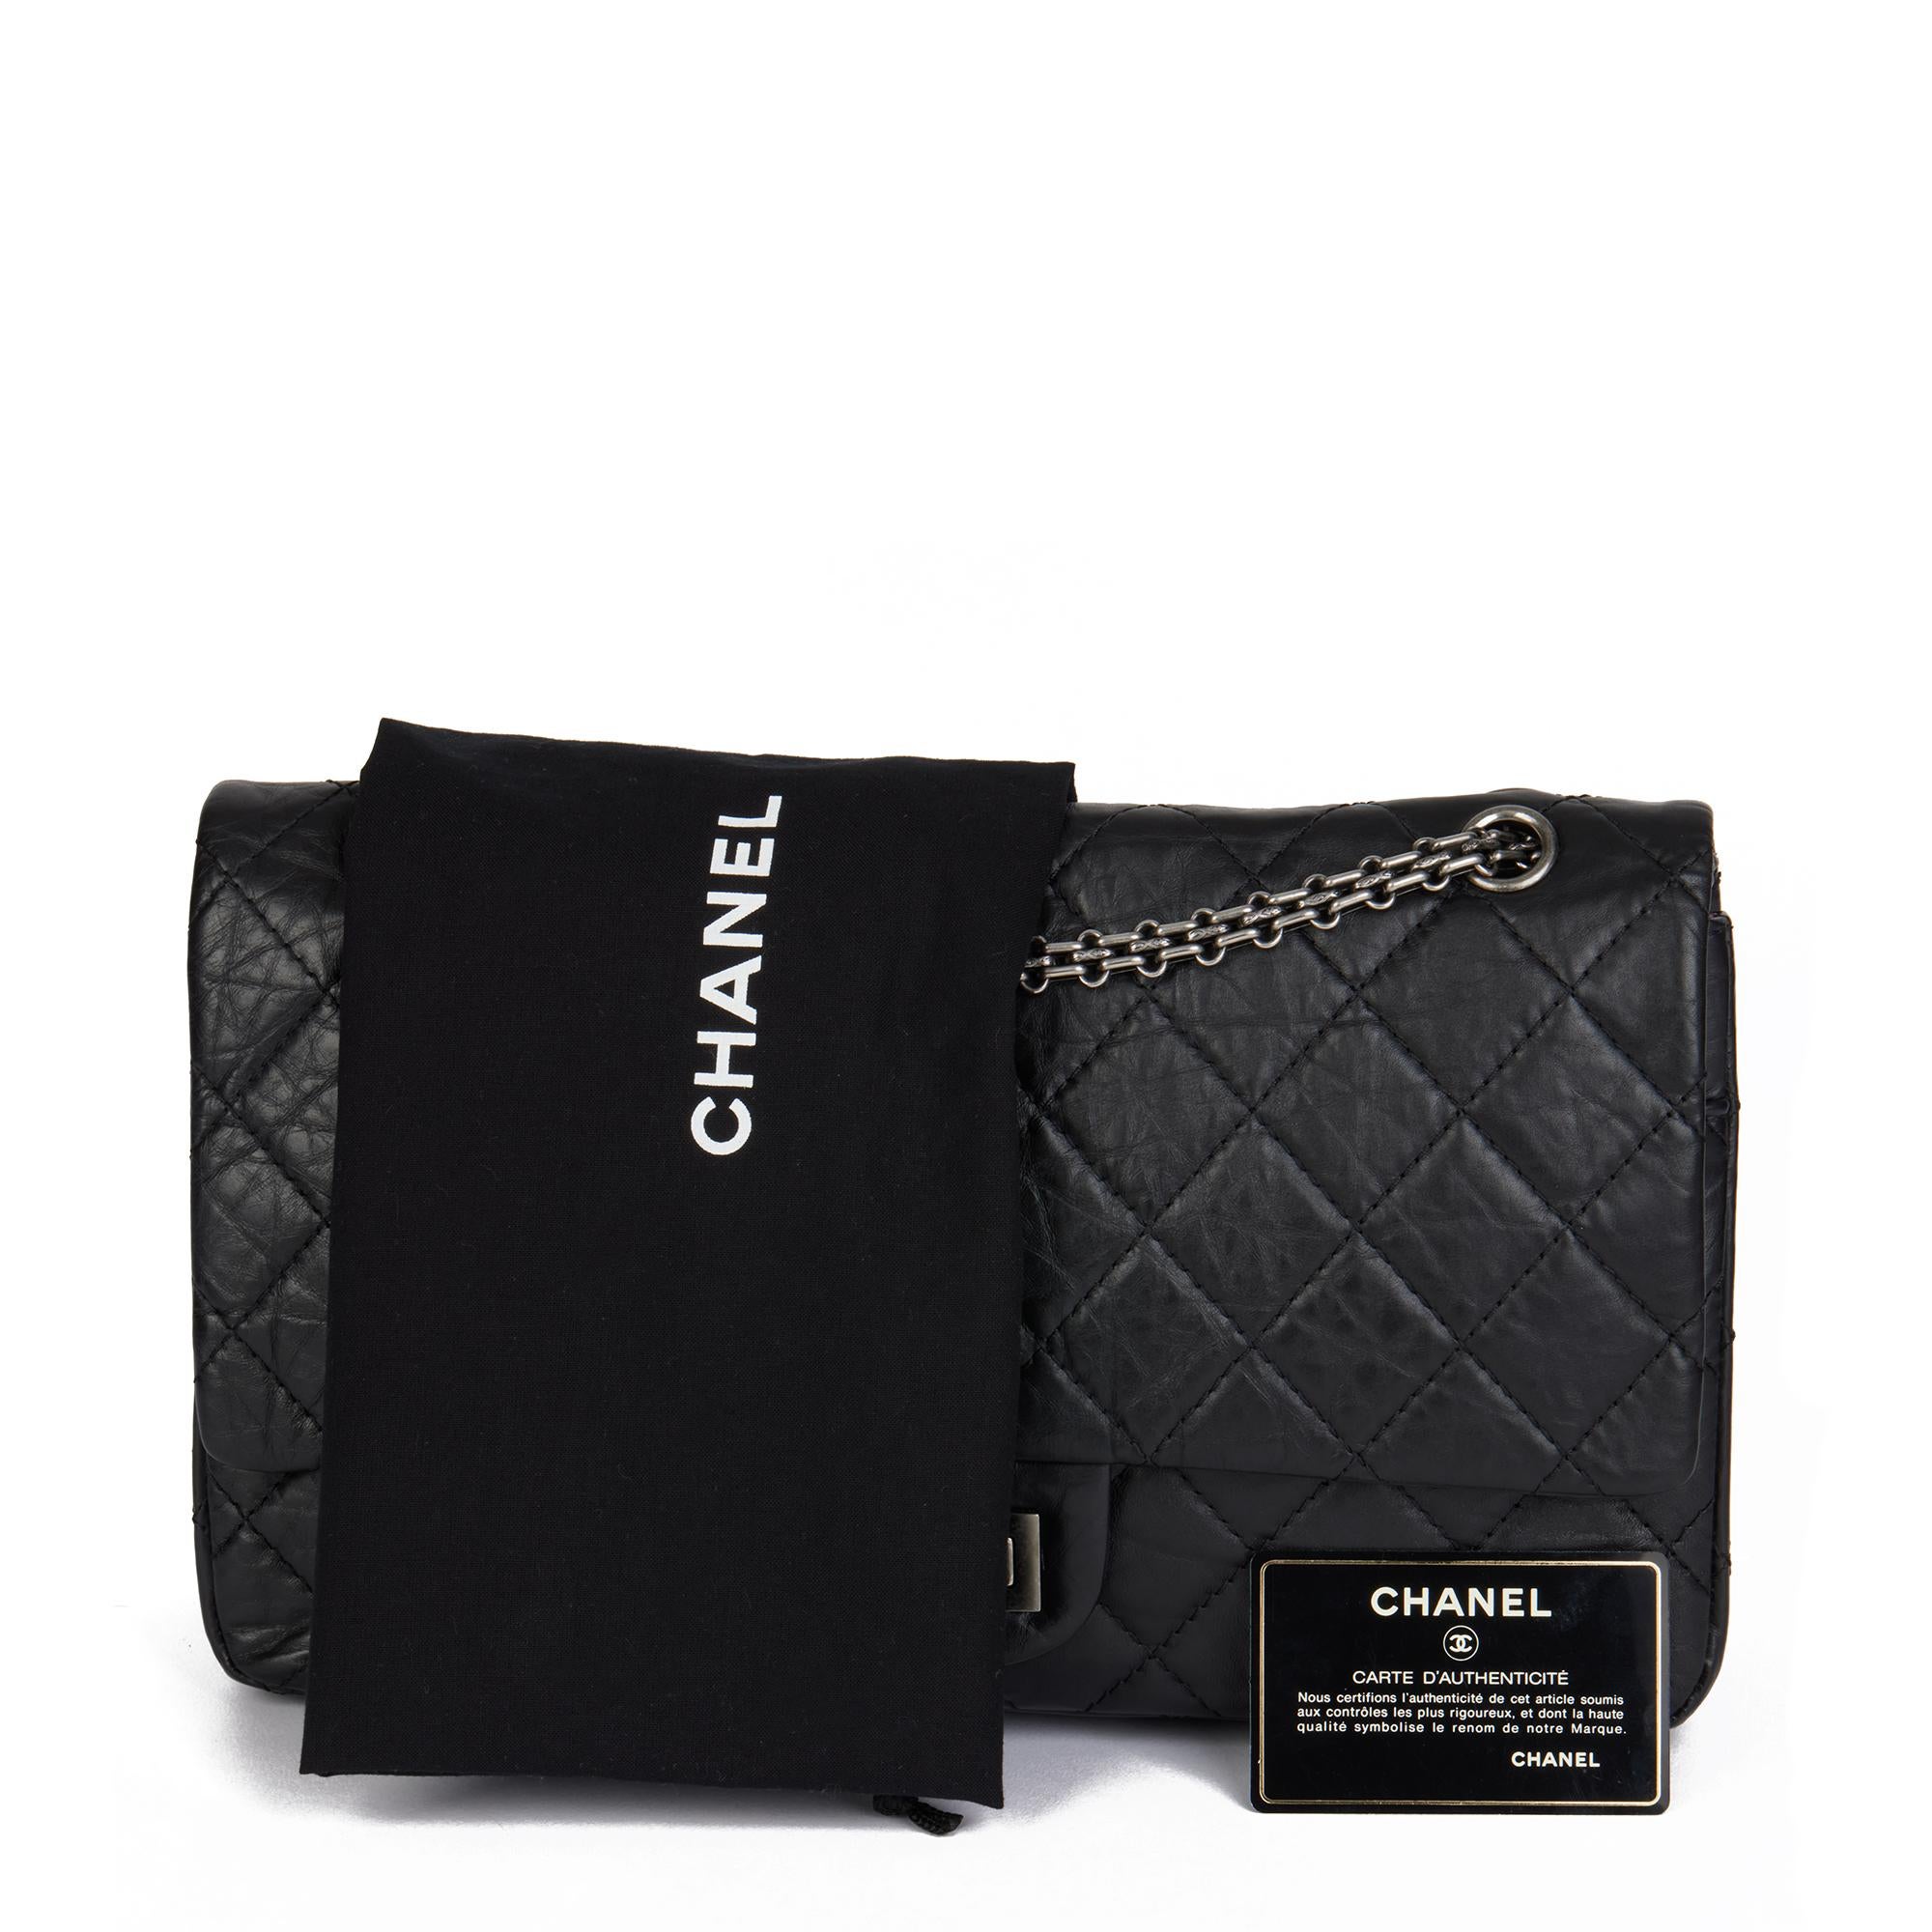 CHANEL Black Quilted Aged Calfskin leather 2.55 Reissue 227 Double Flap Bag 8